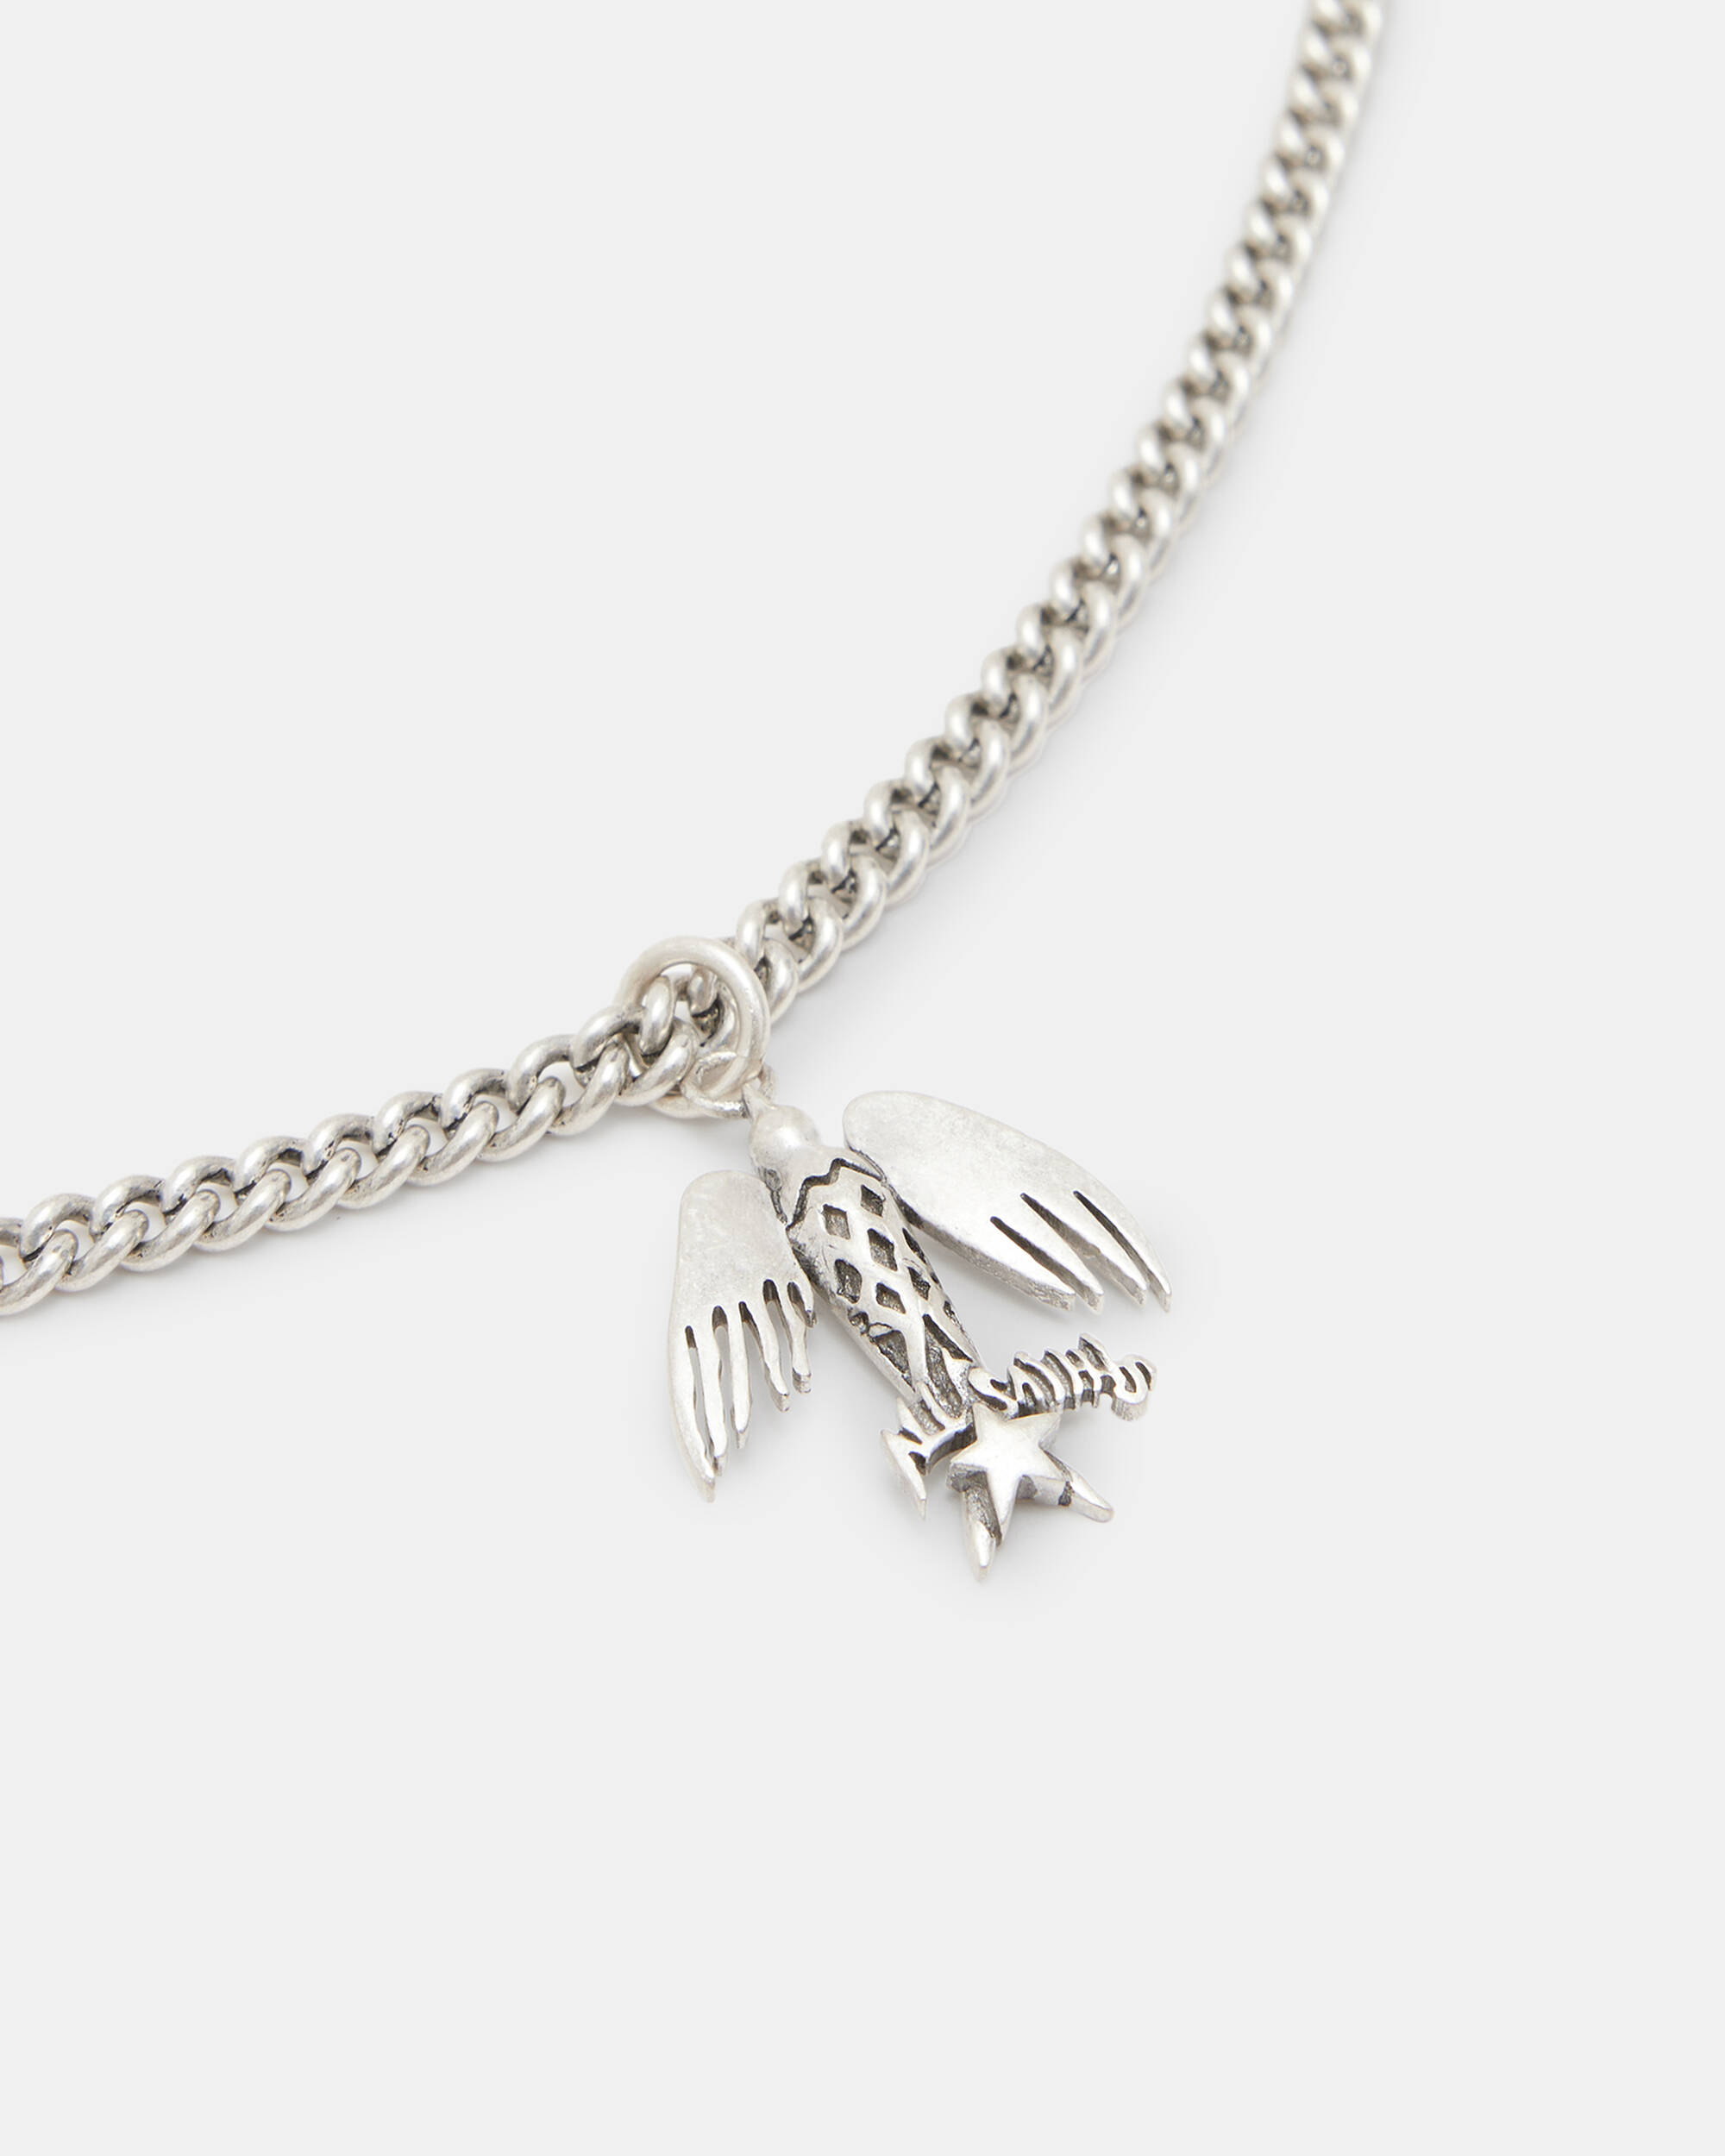 PHEONIX STERLING SILVER NECKLACE